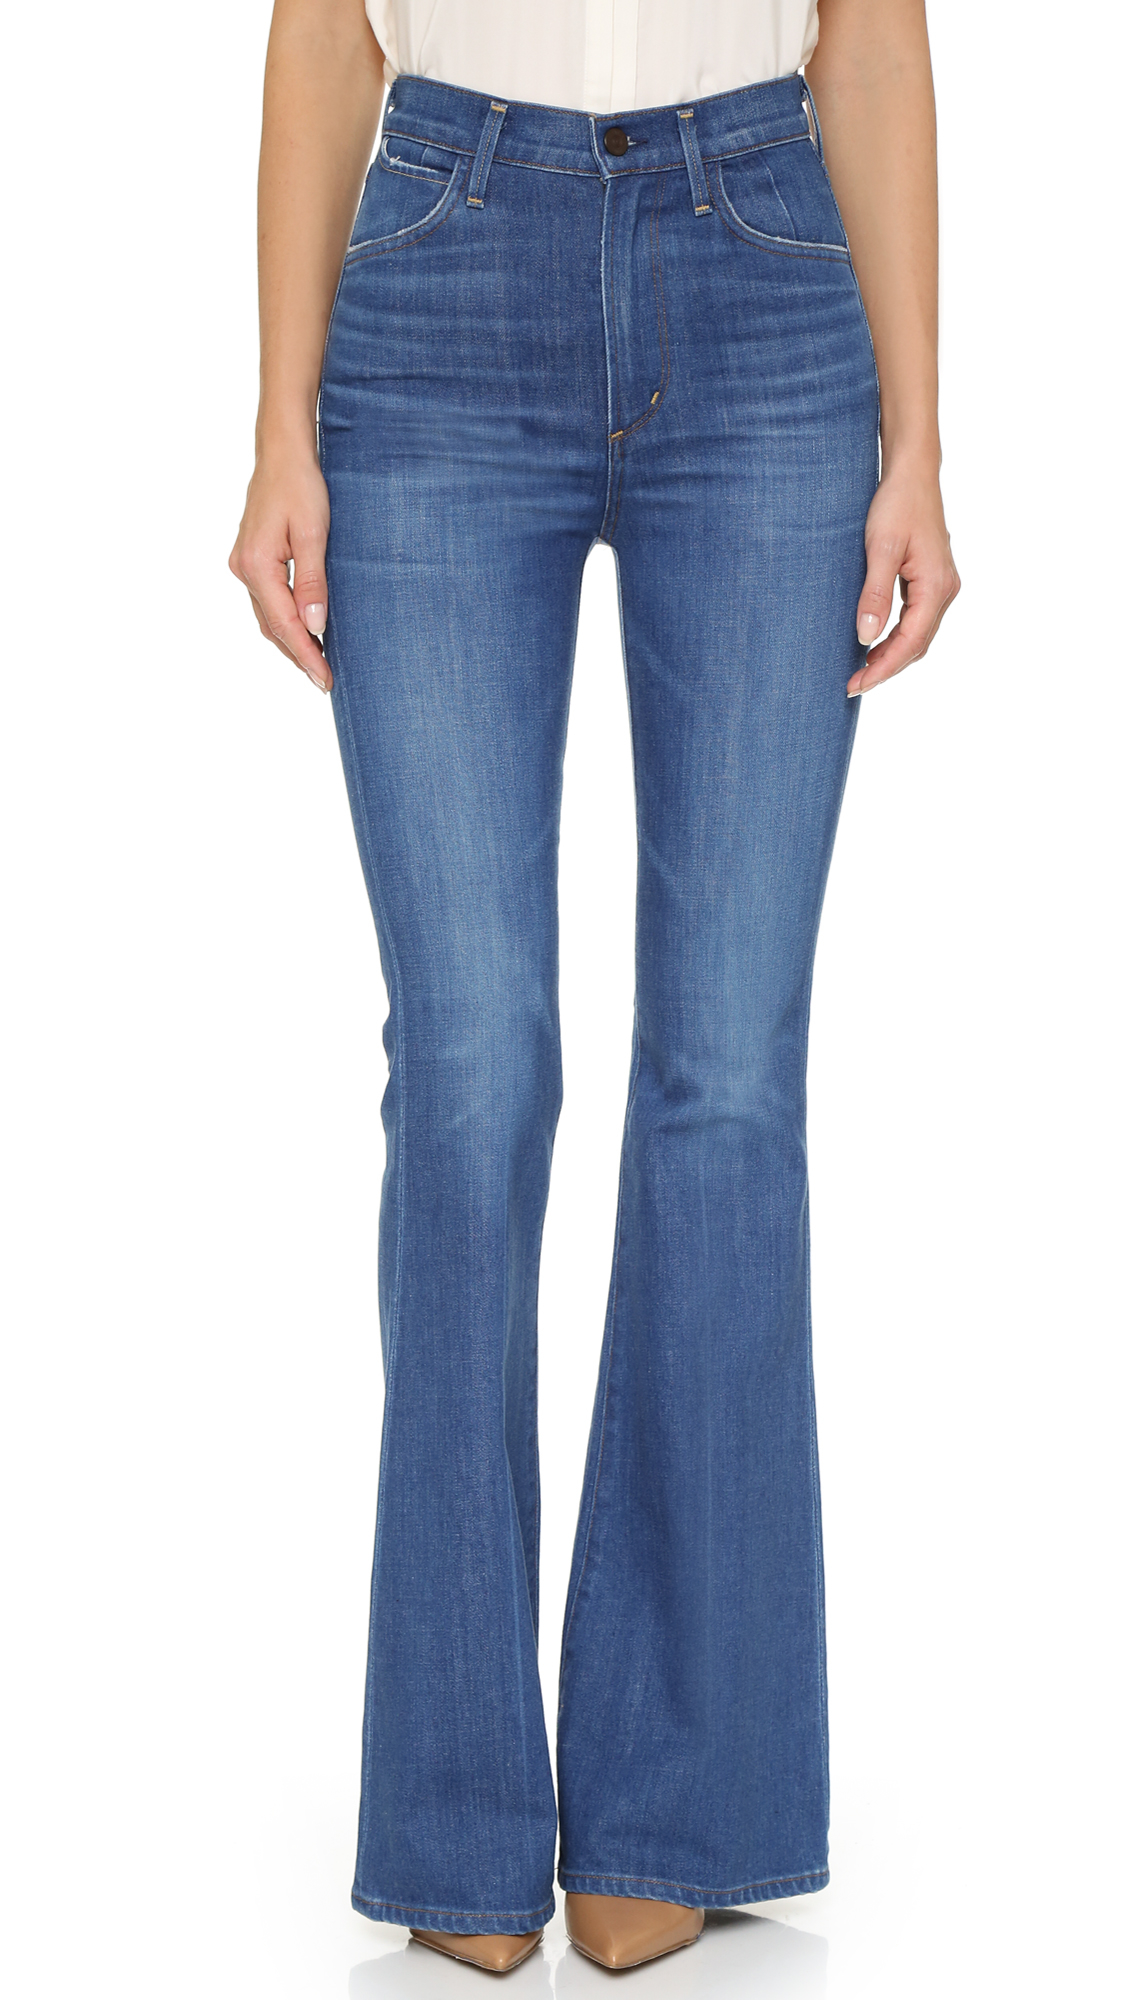 Lyst - Citizens of humanity Cherie High Rise Flare Jeans in Blue